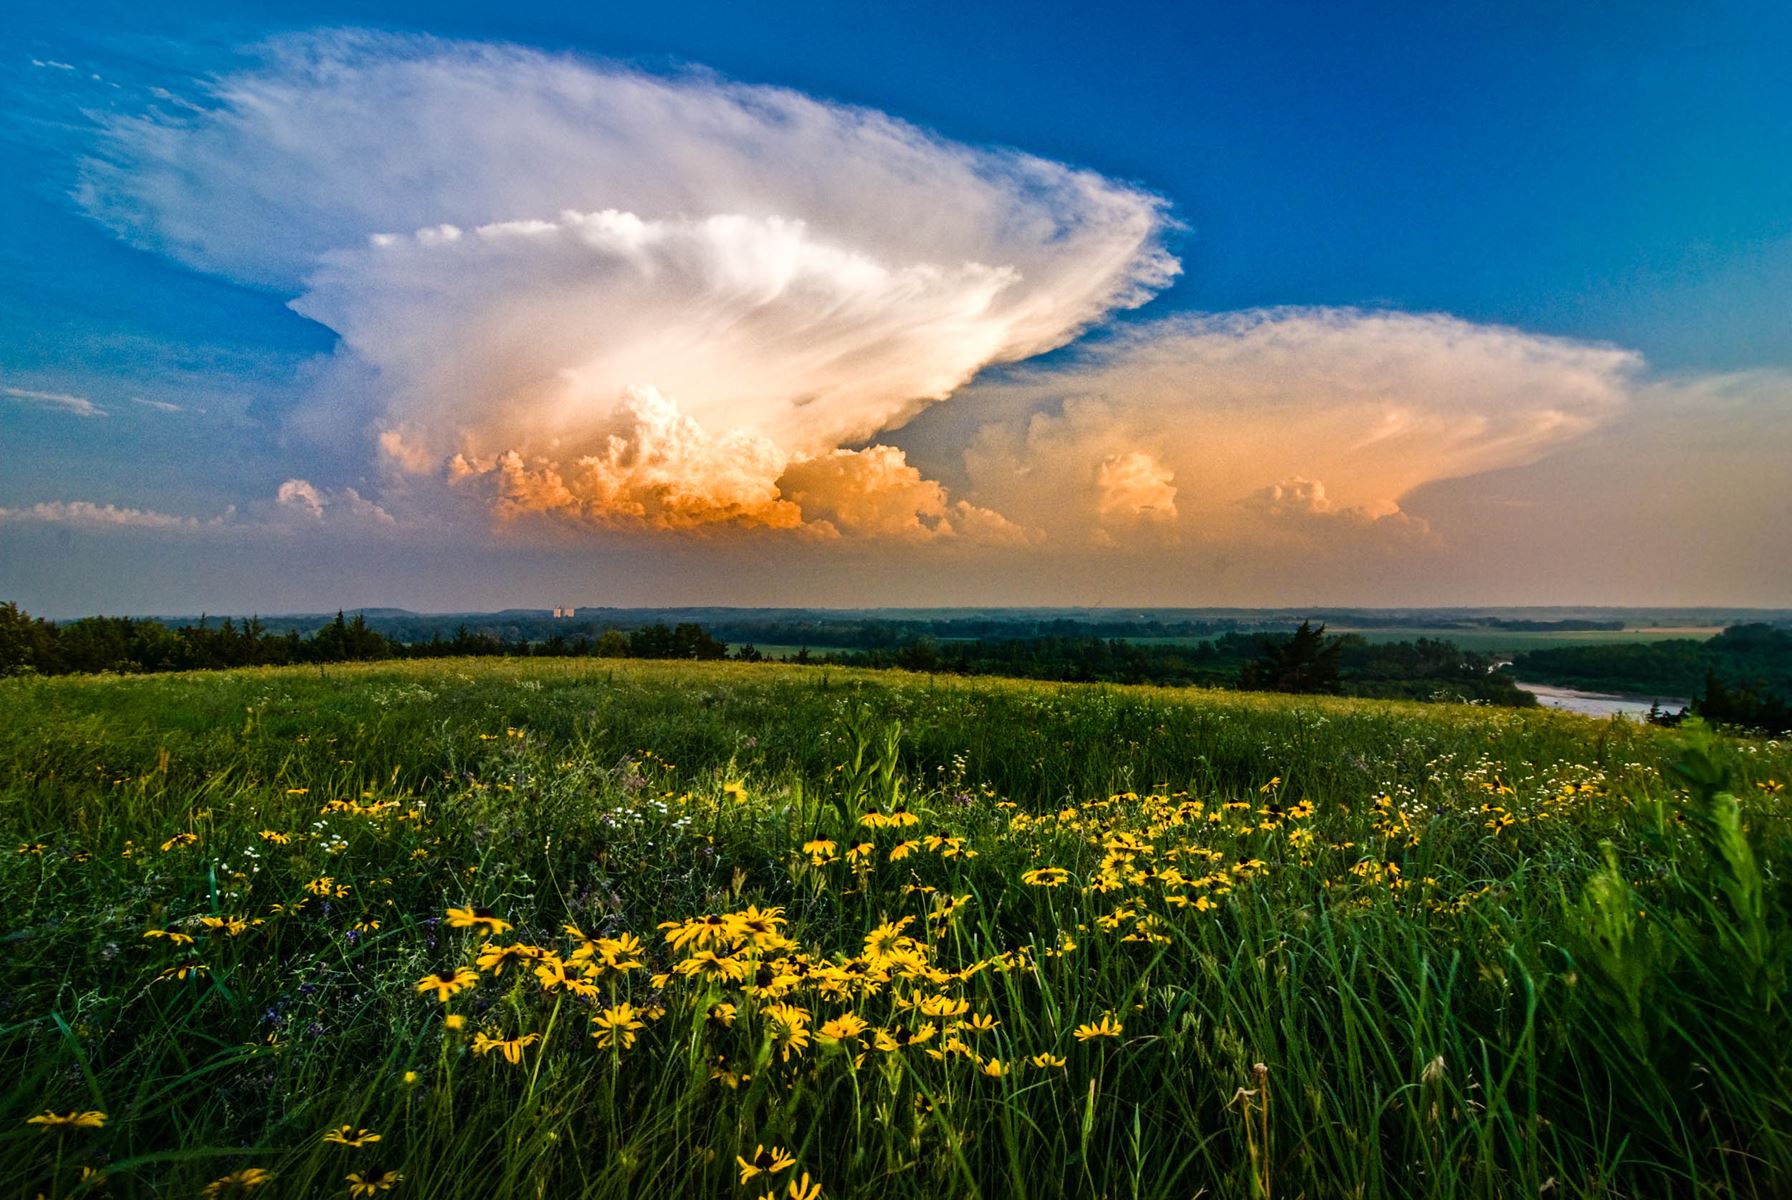 Storm clouds building over a green field with prairie flowers